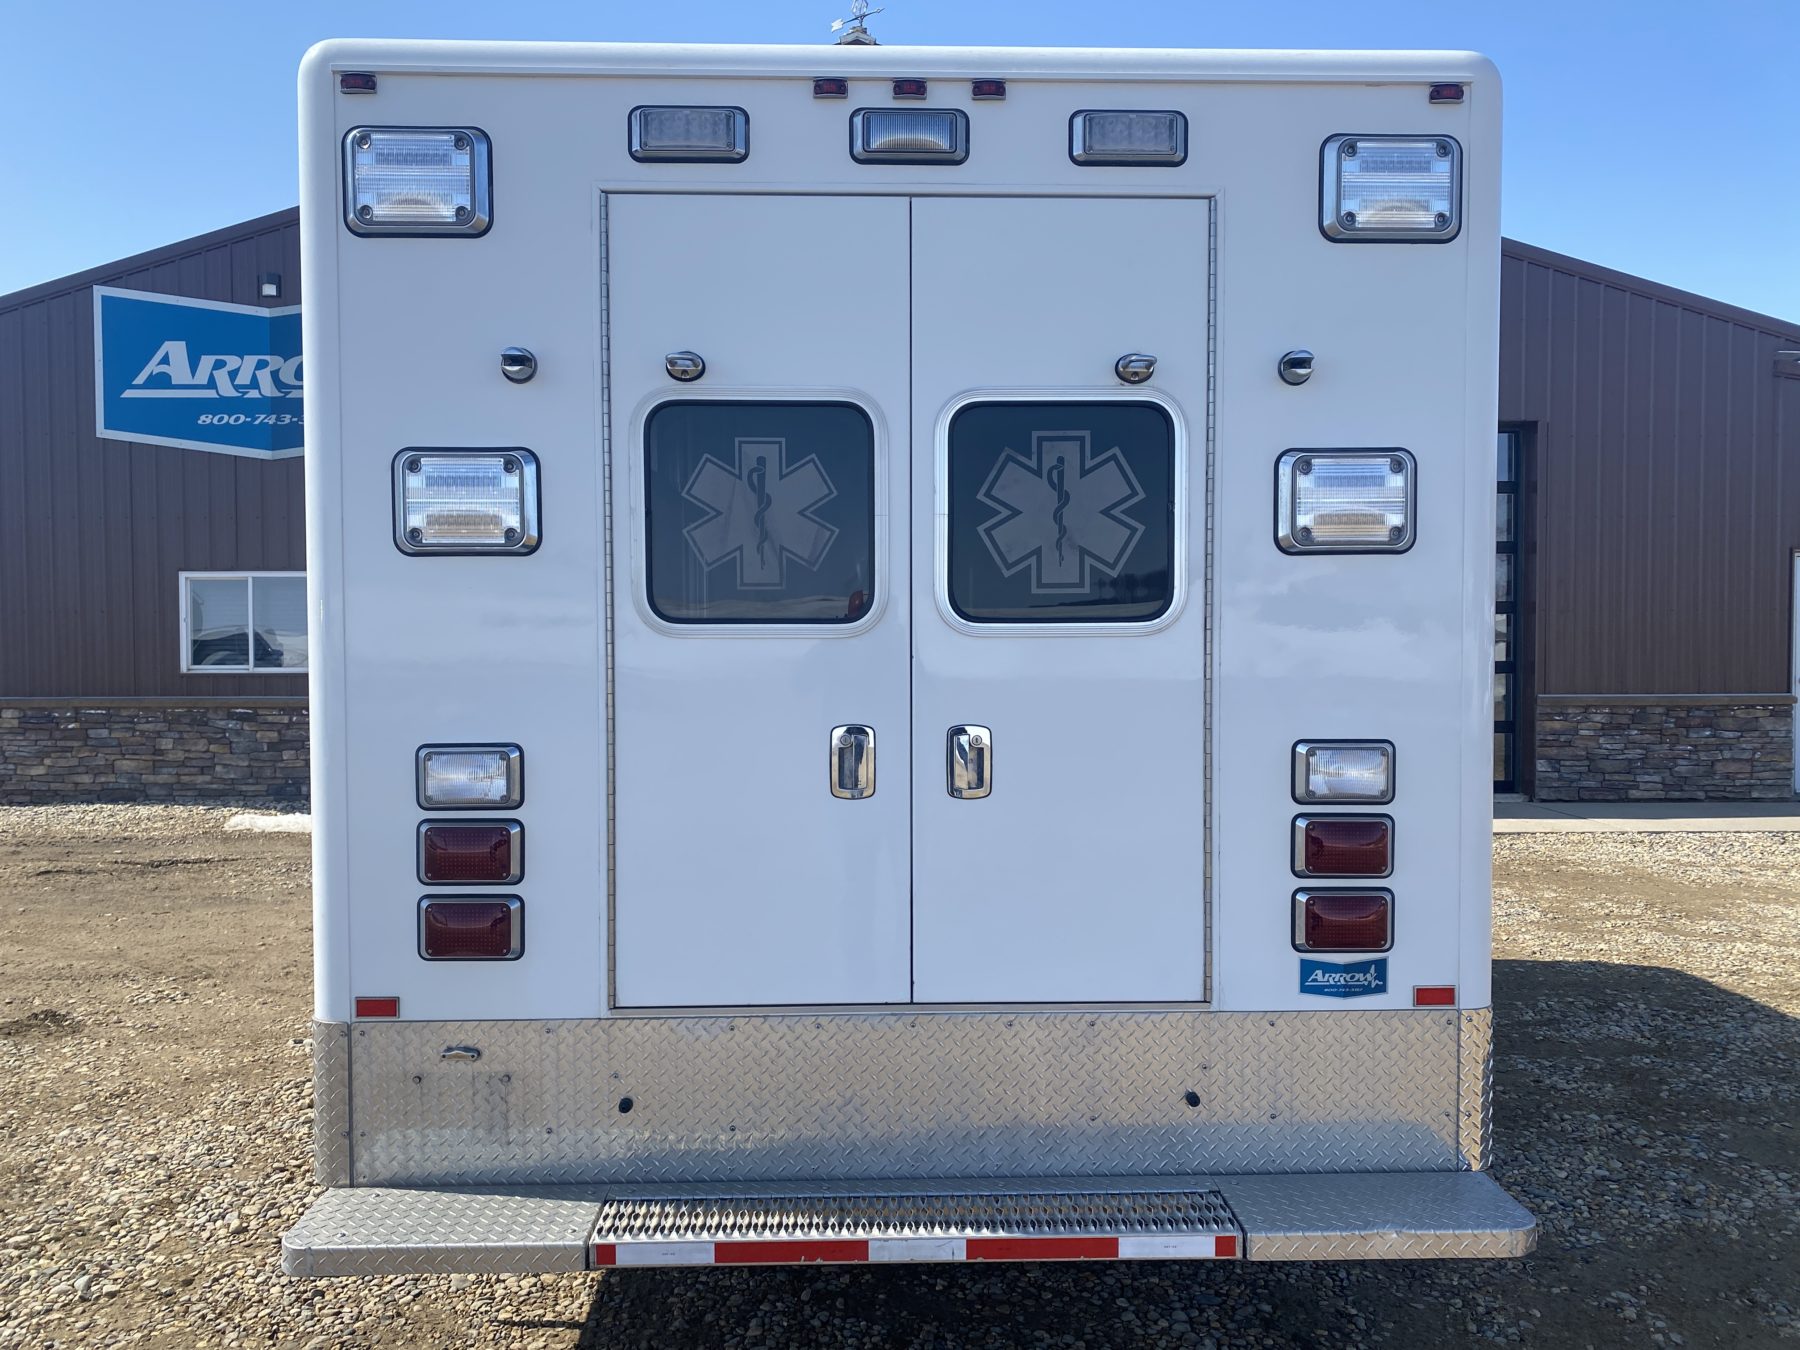 2019 Ford F450 4x4 Heavy Duty Ambulance For Sale – Picture 8